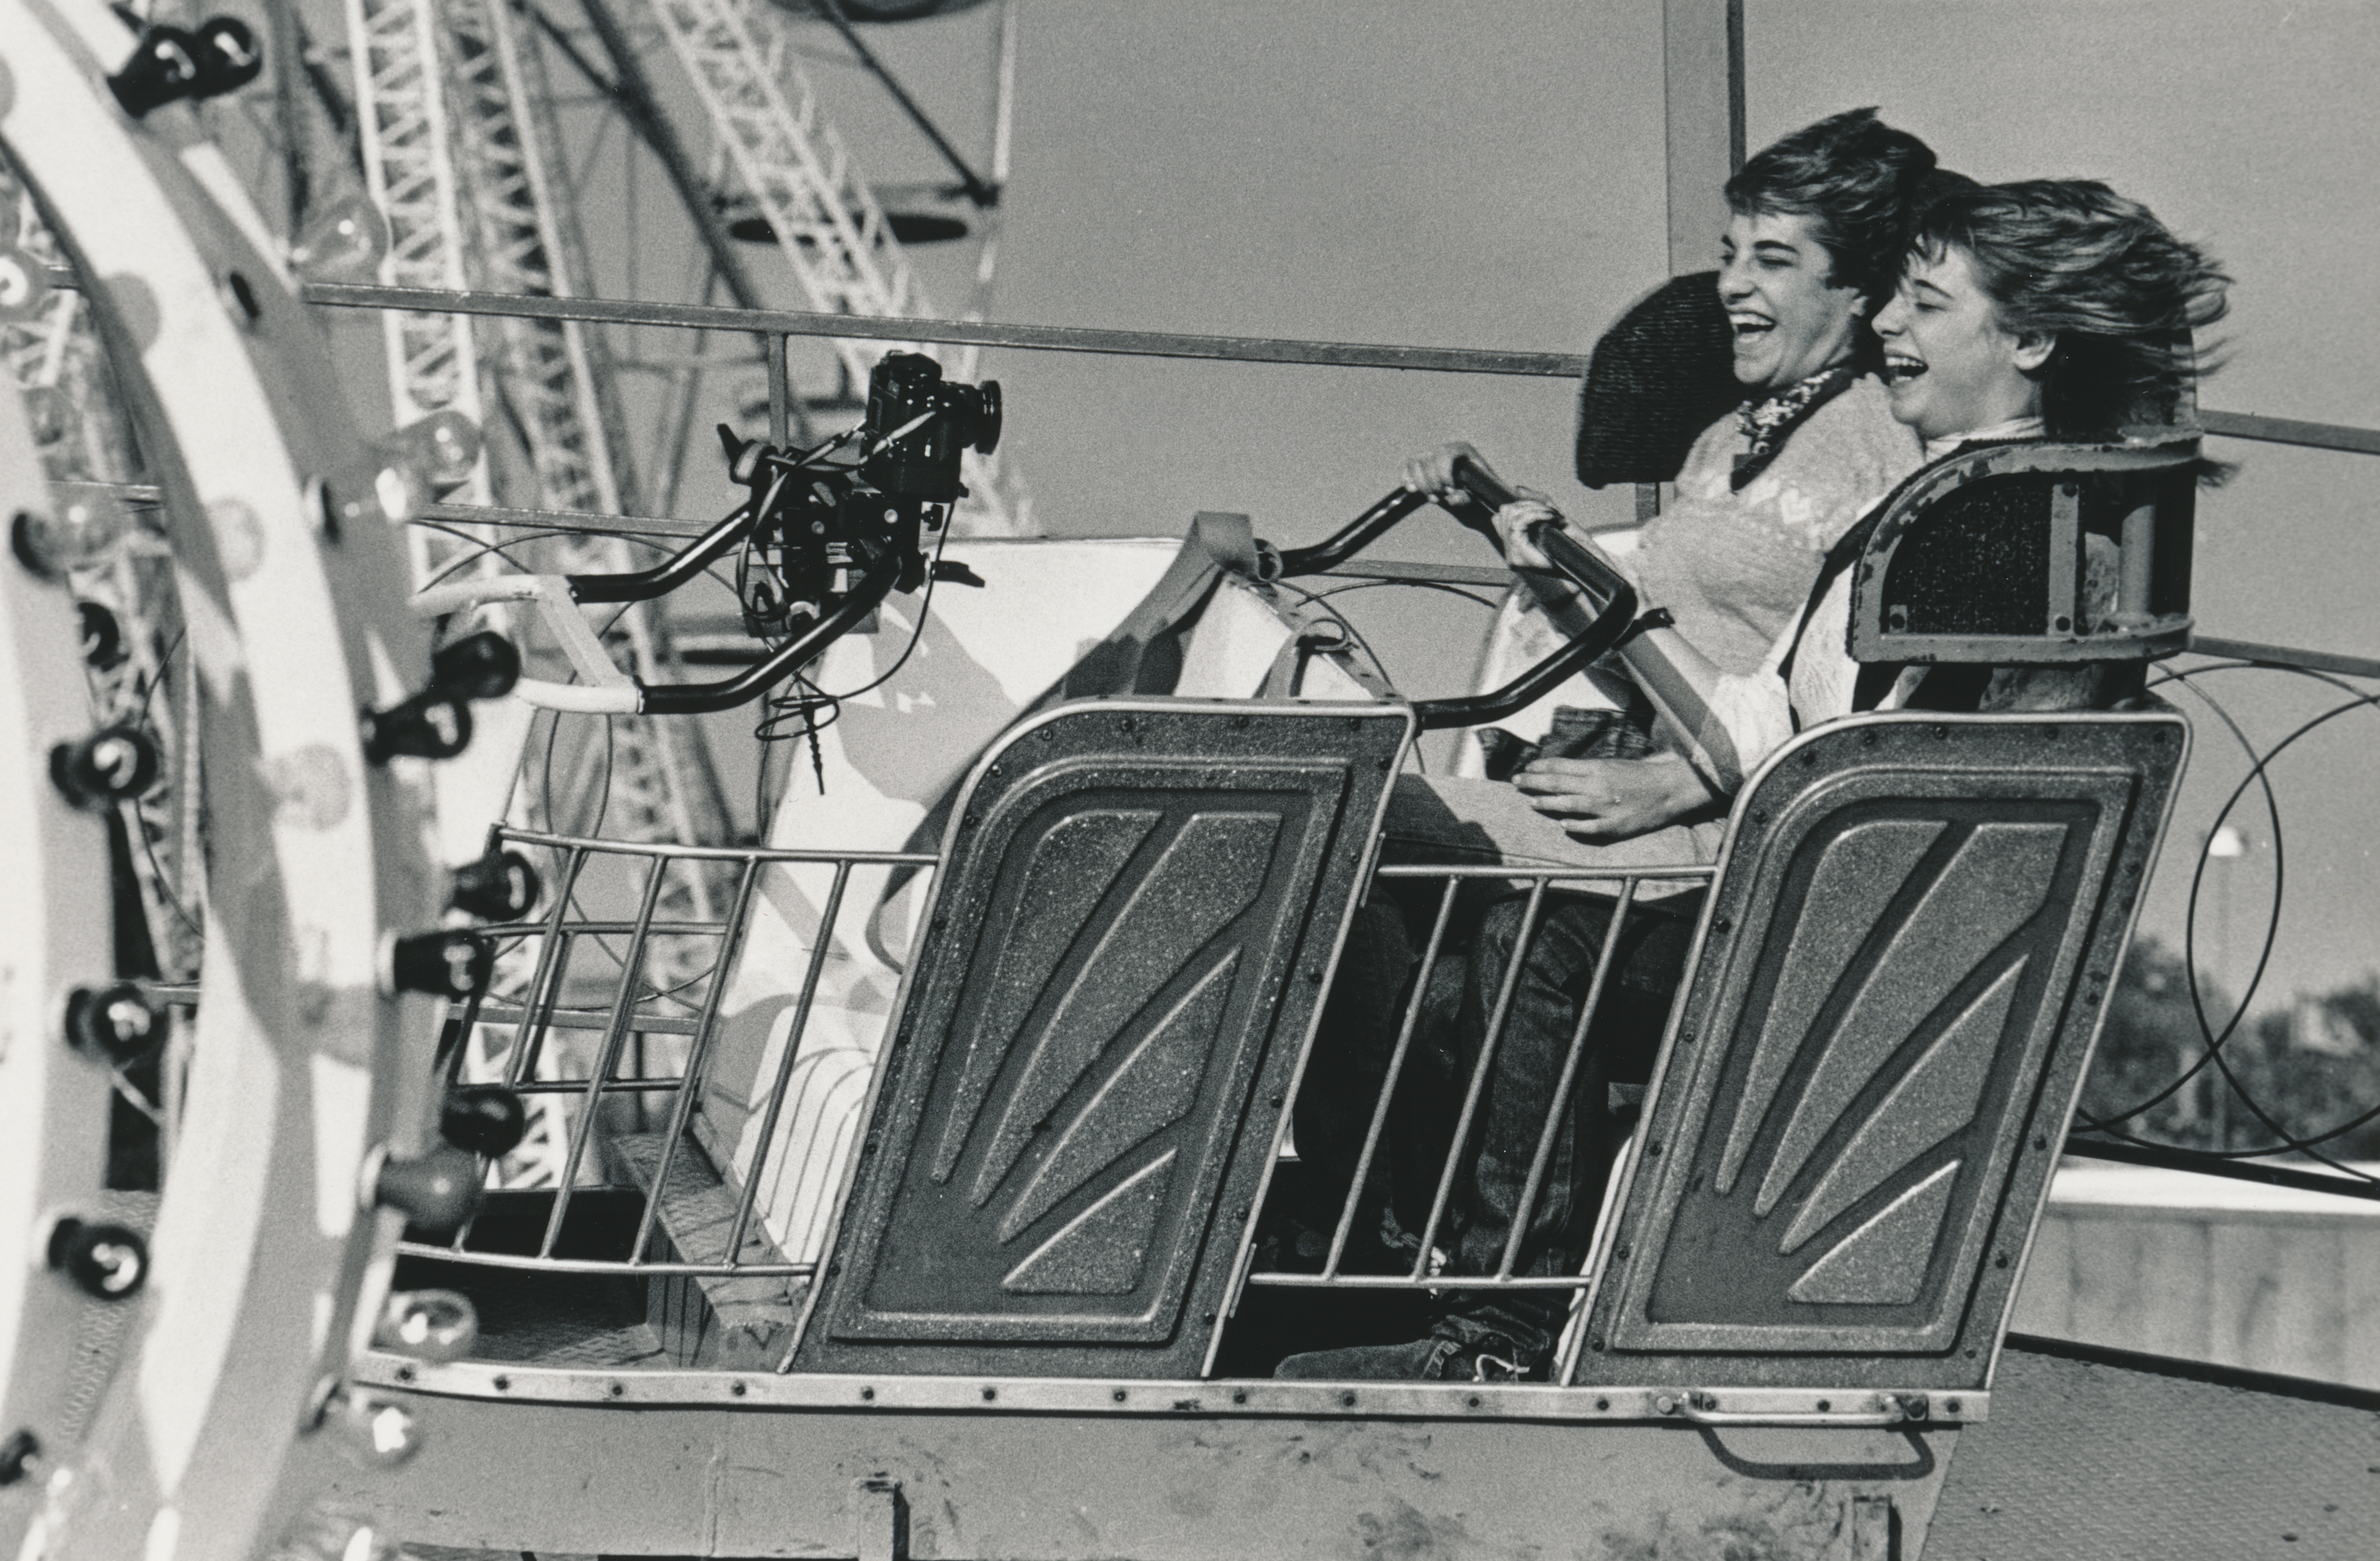 Camera with wireless remote triggering clamped on a ride at Riverside Park in Agawam Massachusetts. 1980s. (Michael S. Gordon / The Republican)